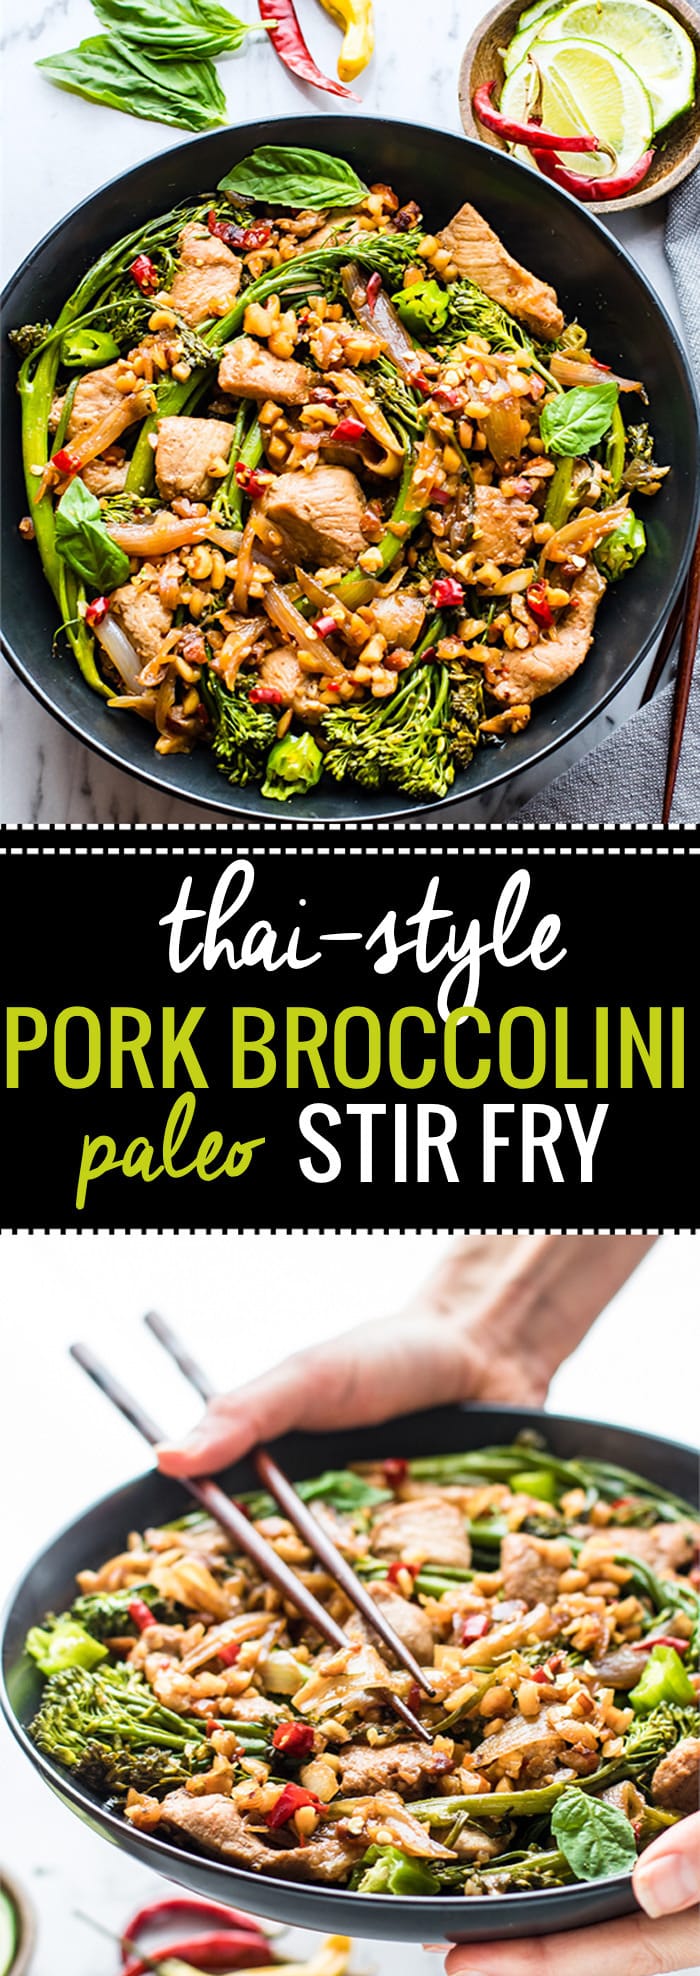 Quick Thai-Style Pork Broccolini Stir Fry. This Thai-Style Stir Fry with Pork and Broccolini is a great weeknight meal that is easy to make, gluten free, and paleo friendly. A Healthy protein packed that only takes 30 minutes from start to finish! @cottercrunch